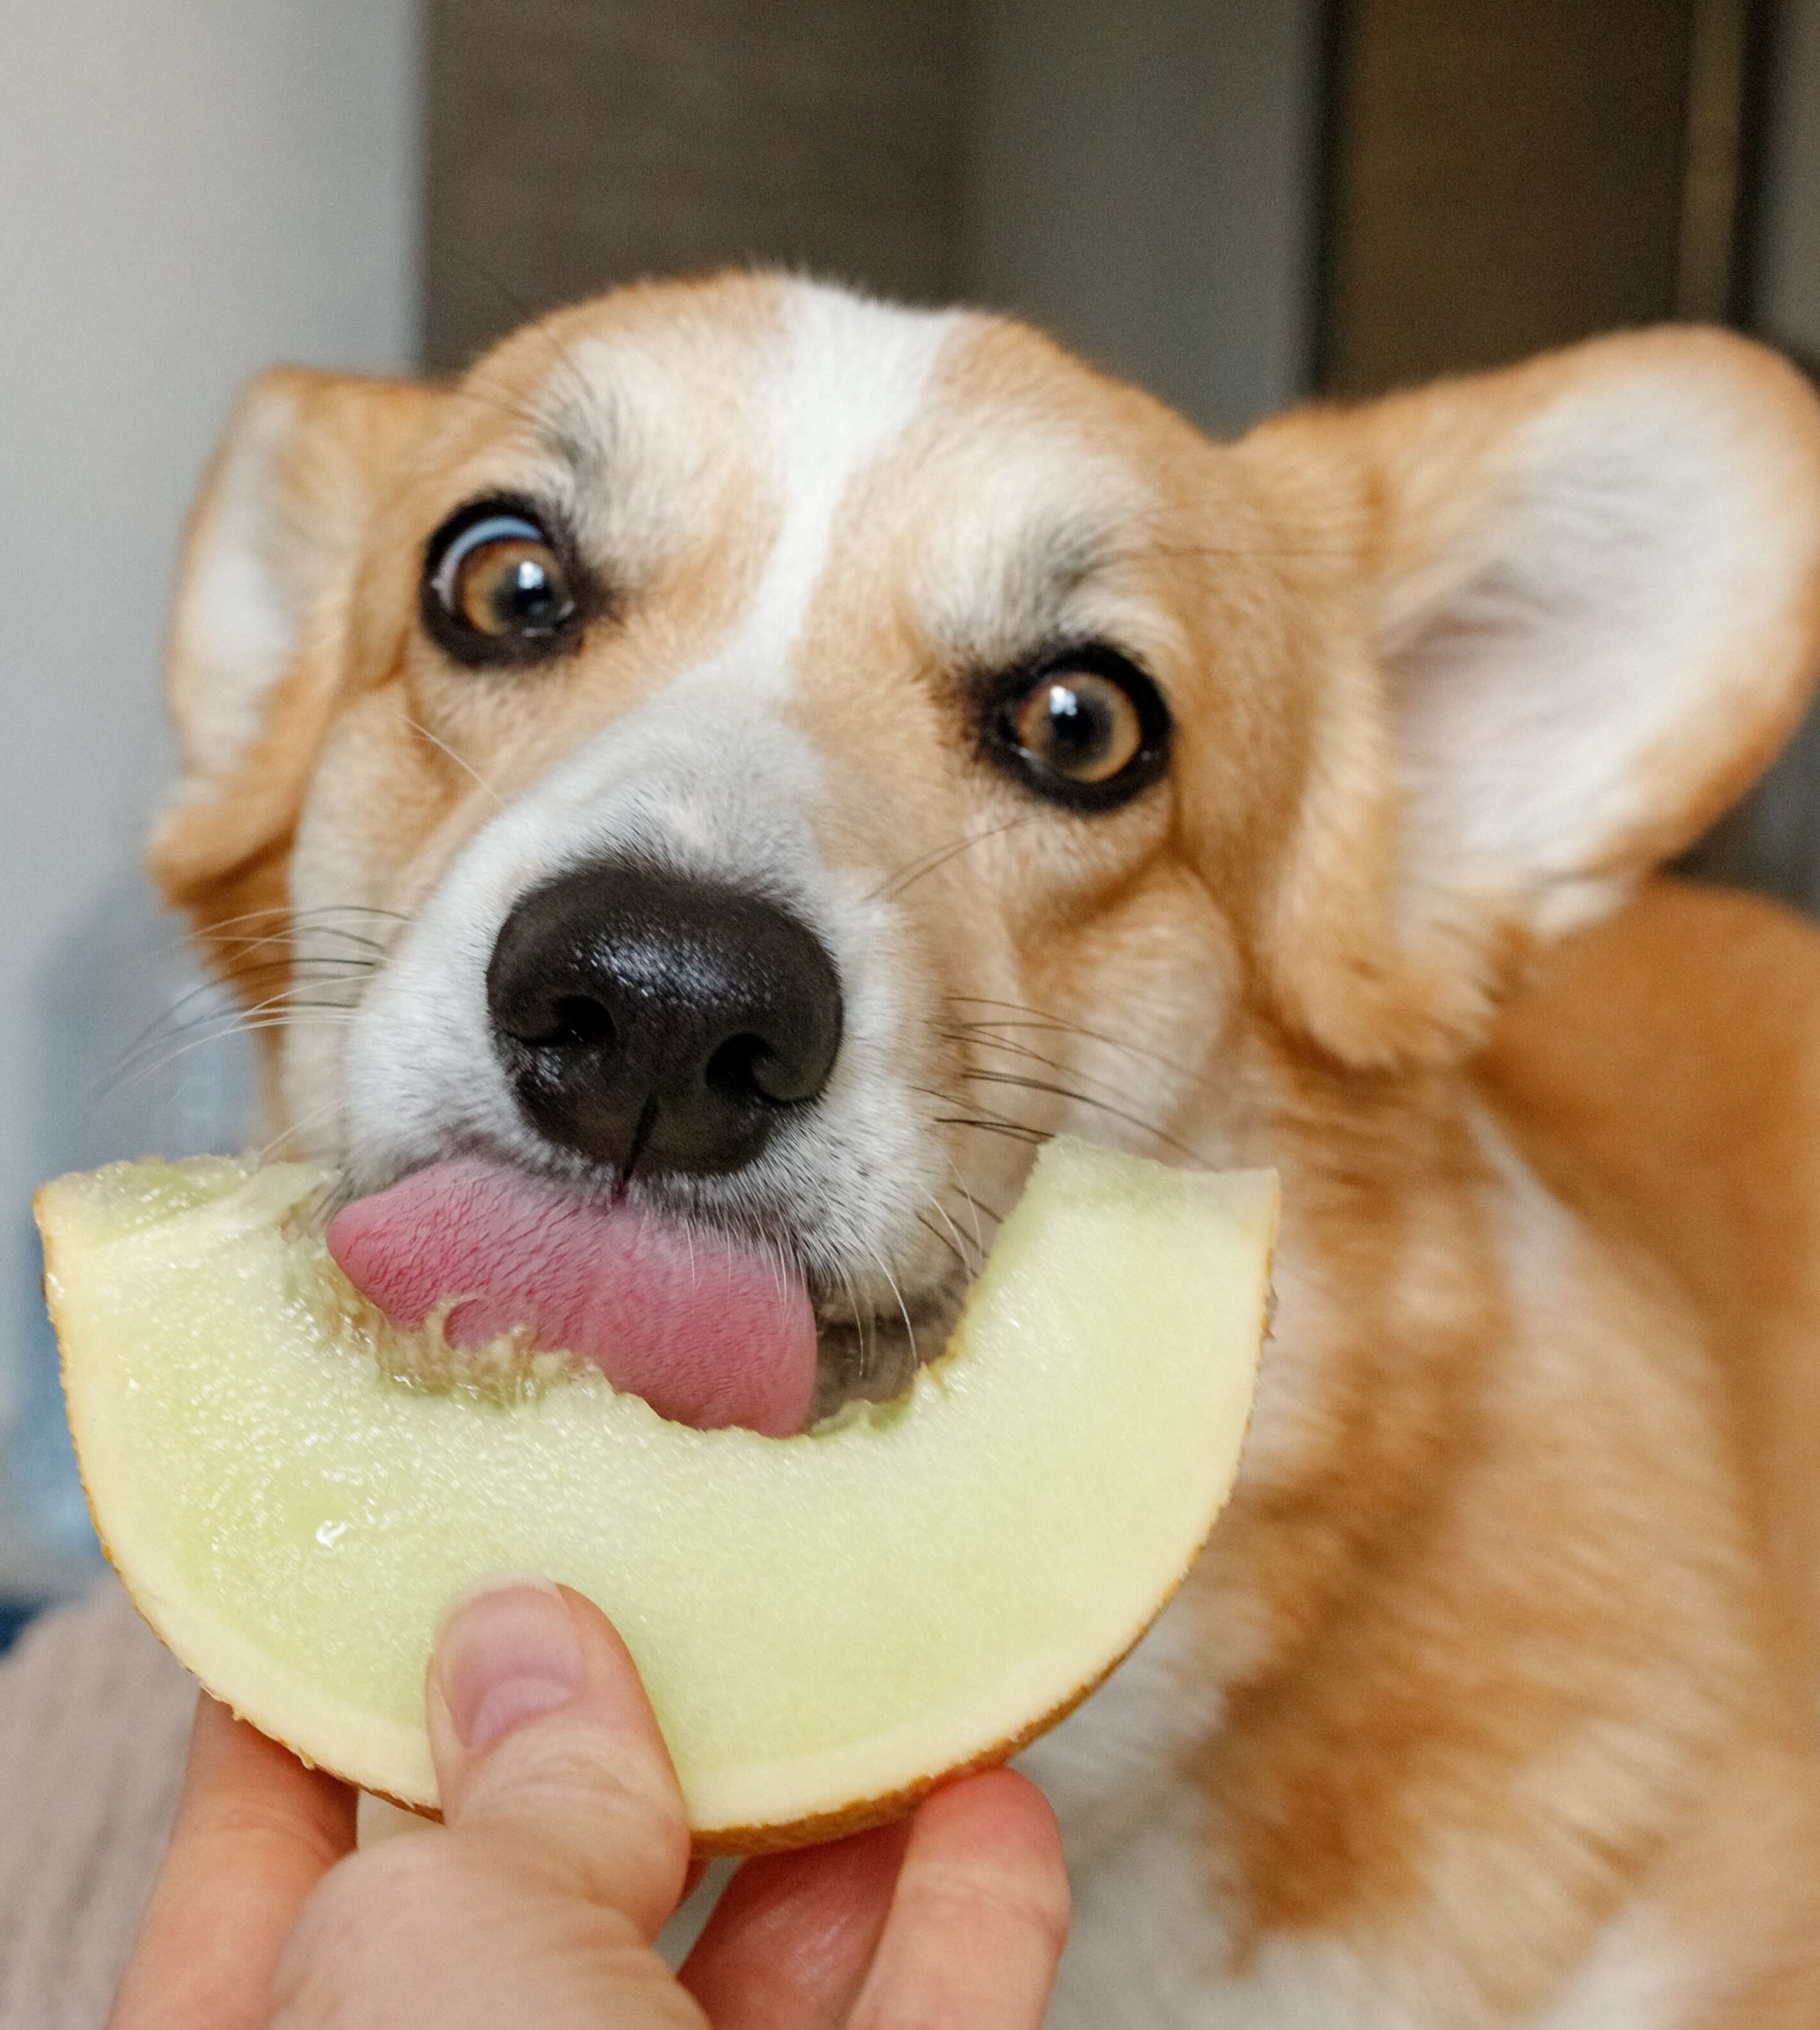 Food aggression in dogs - positive reinforcement with treats 